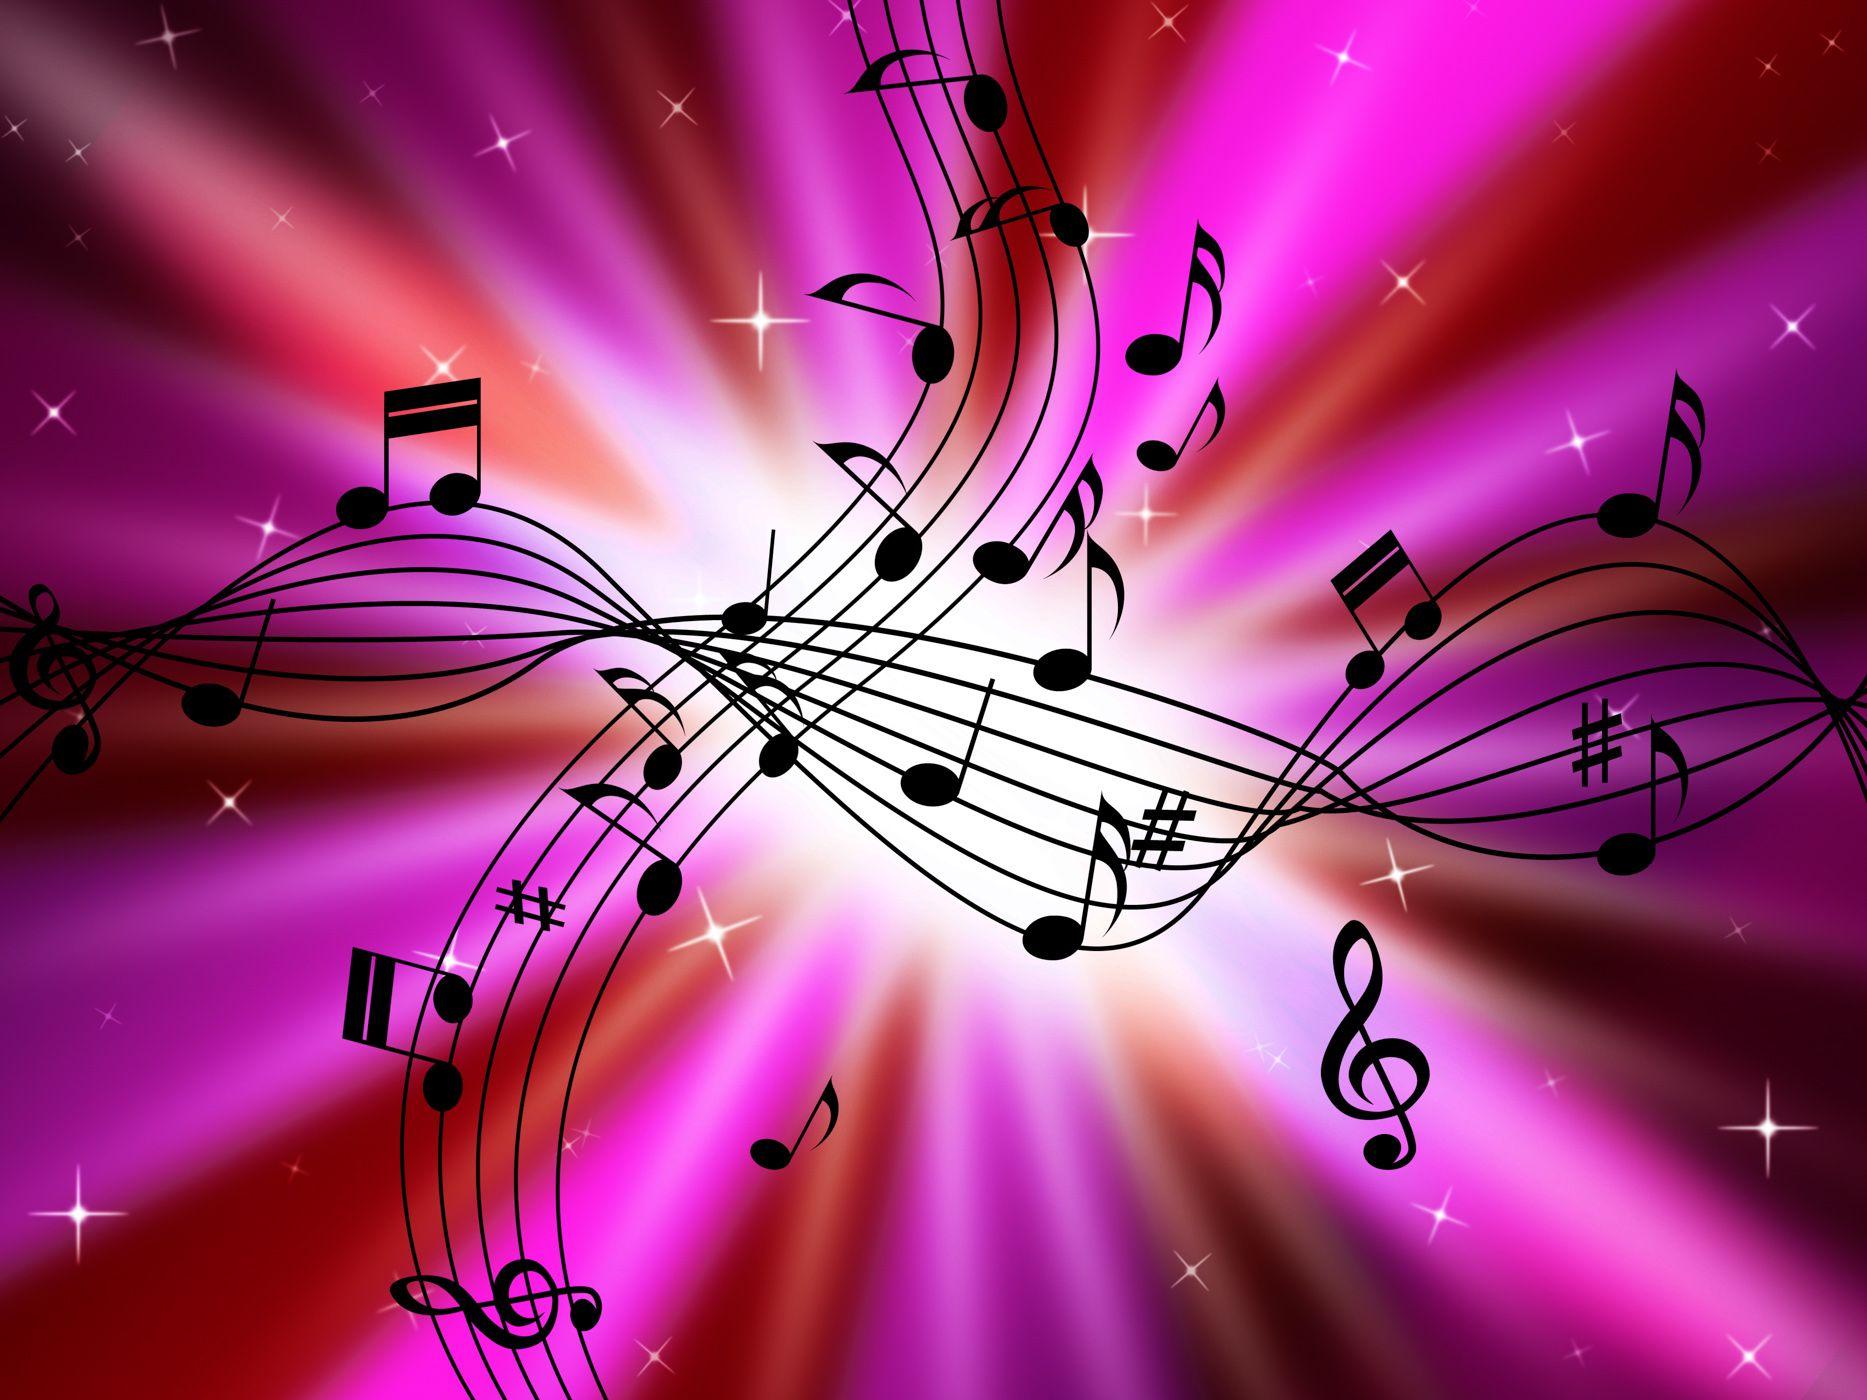 Free photo: Pink Music Background Shows Musical Instruments